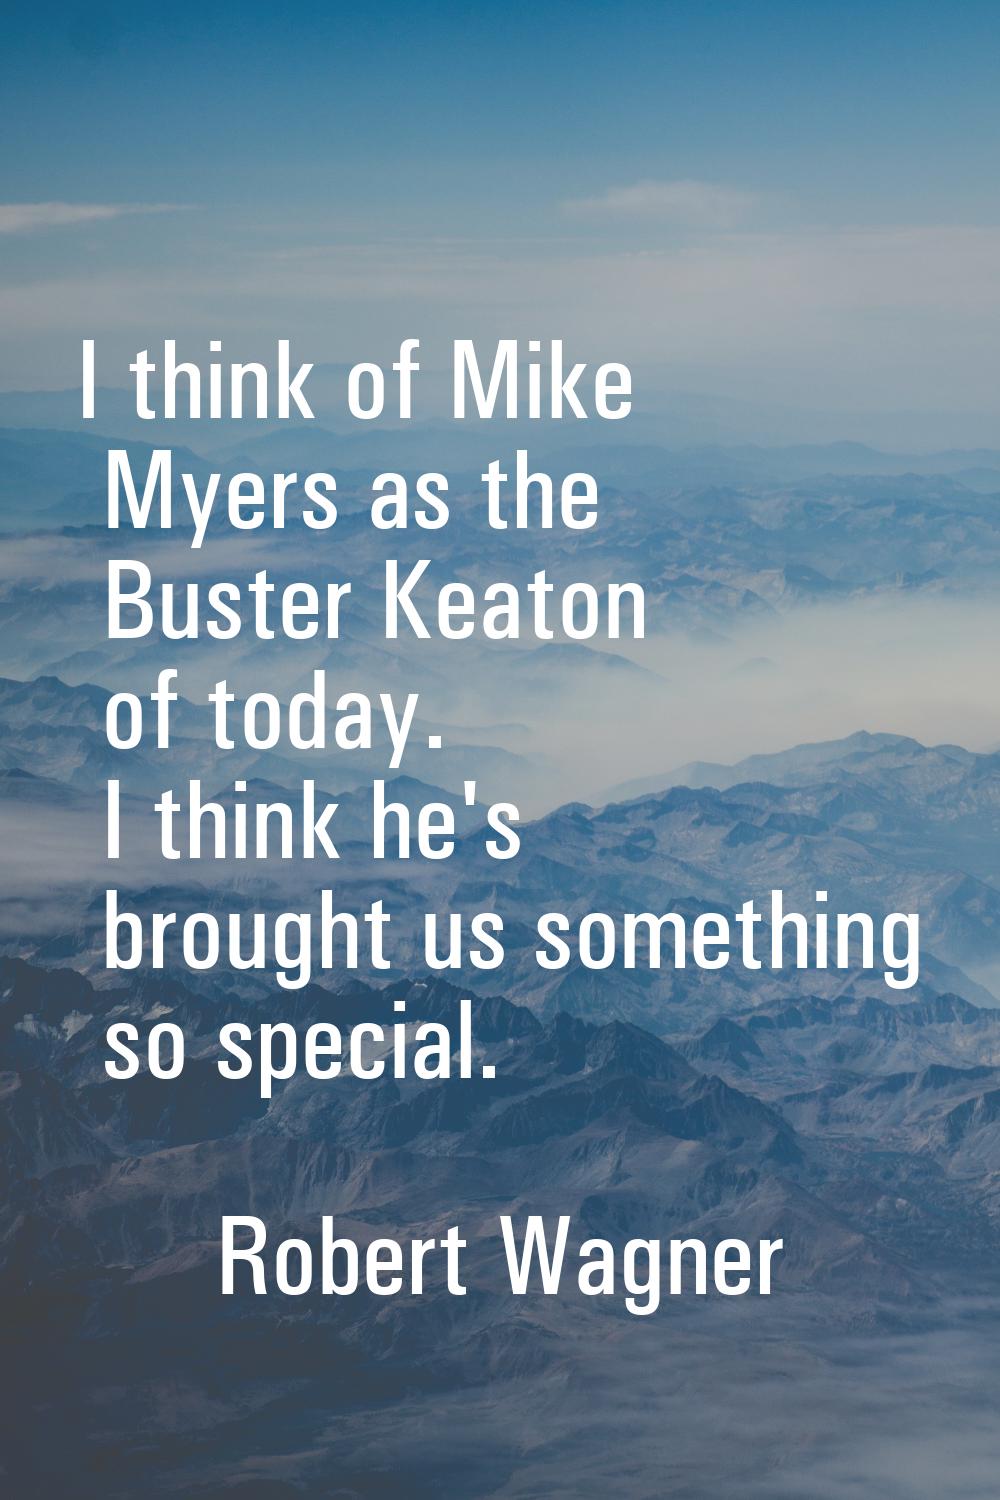 I think of Mike Myers as the Buster Keaton of today. I think he's brought us something so special.